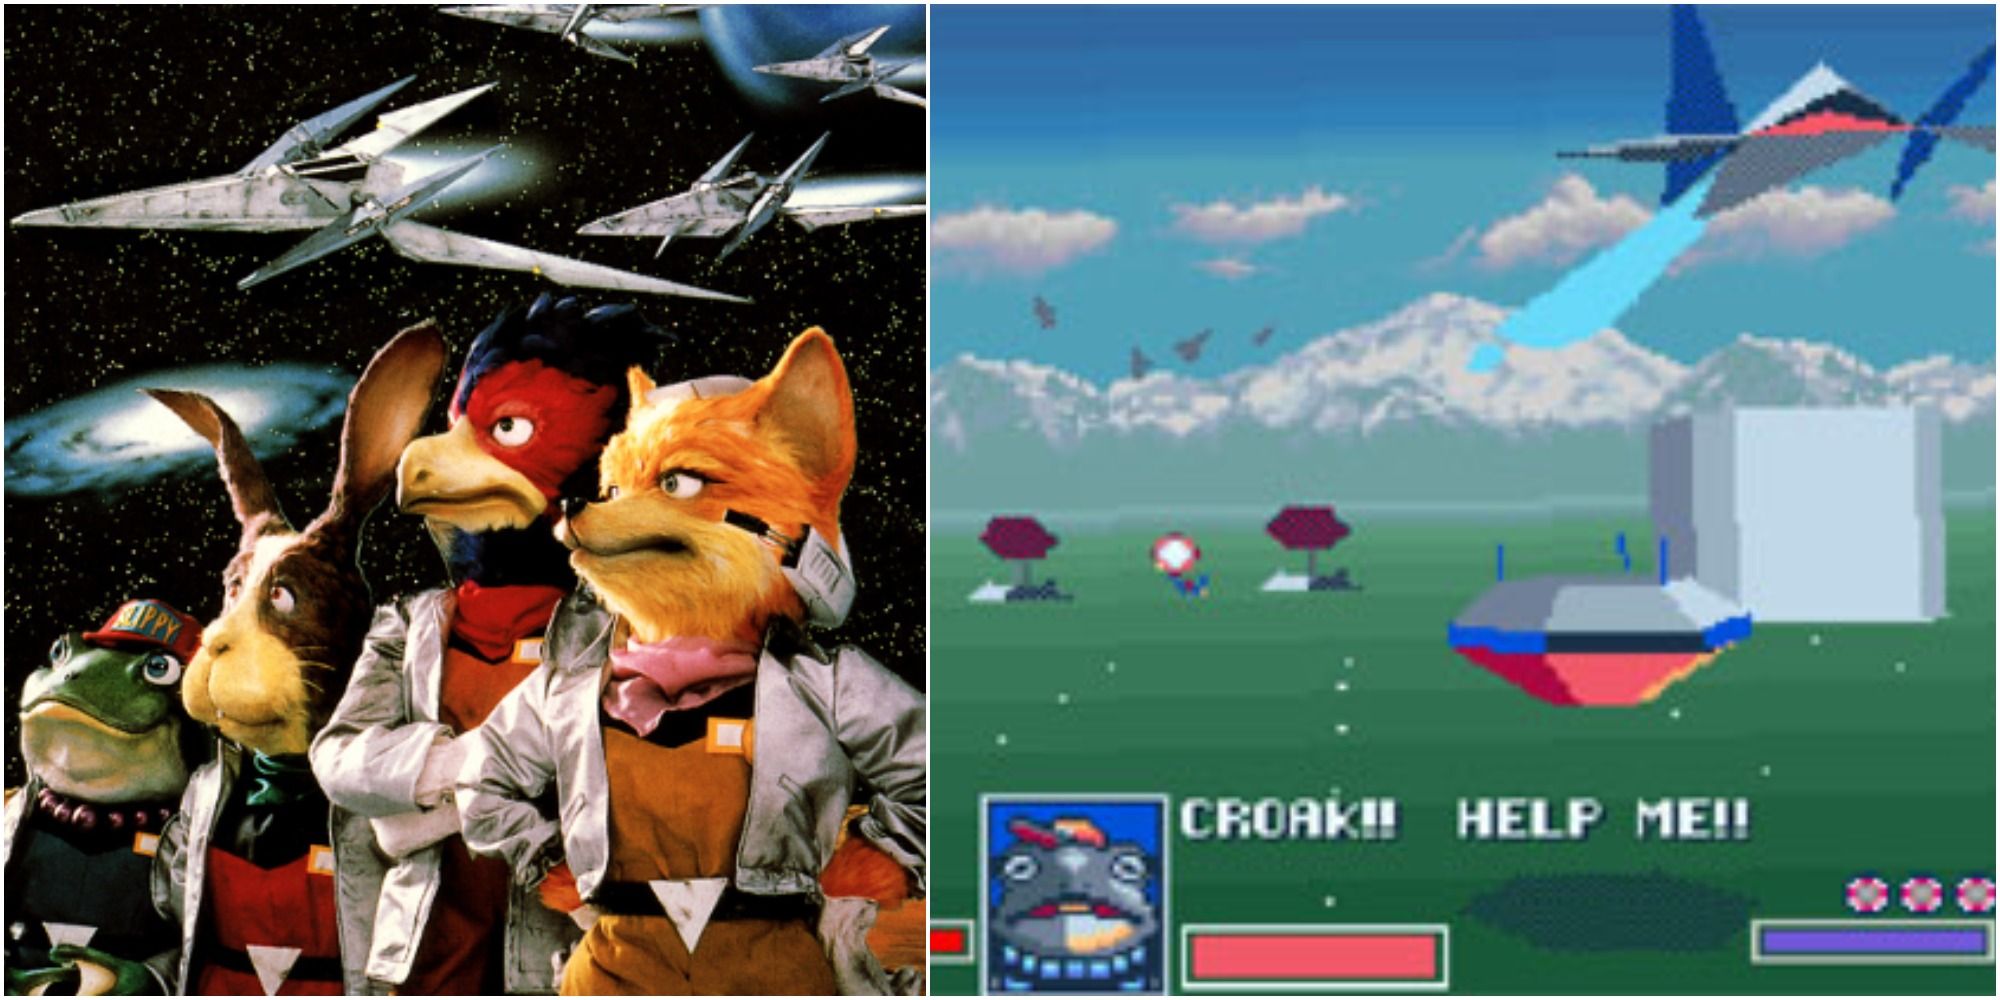 Star Fox characters and gameplay from the retro game